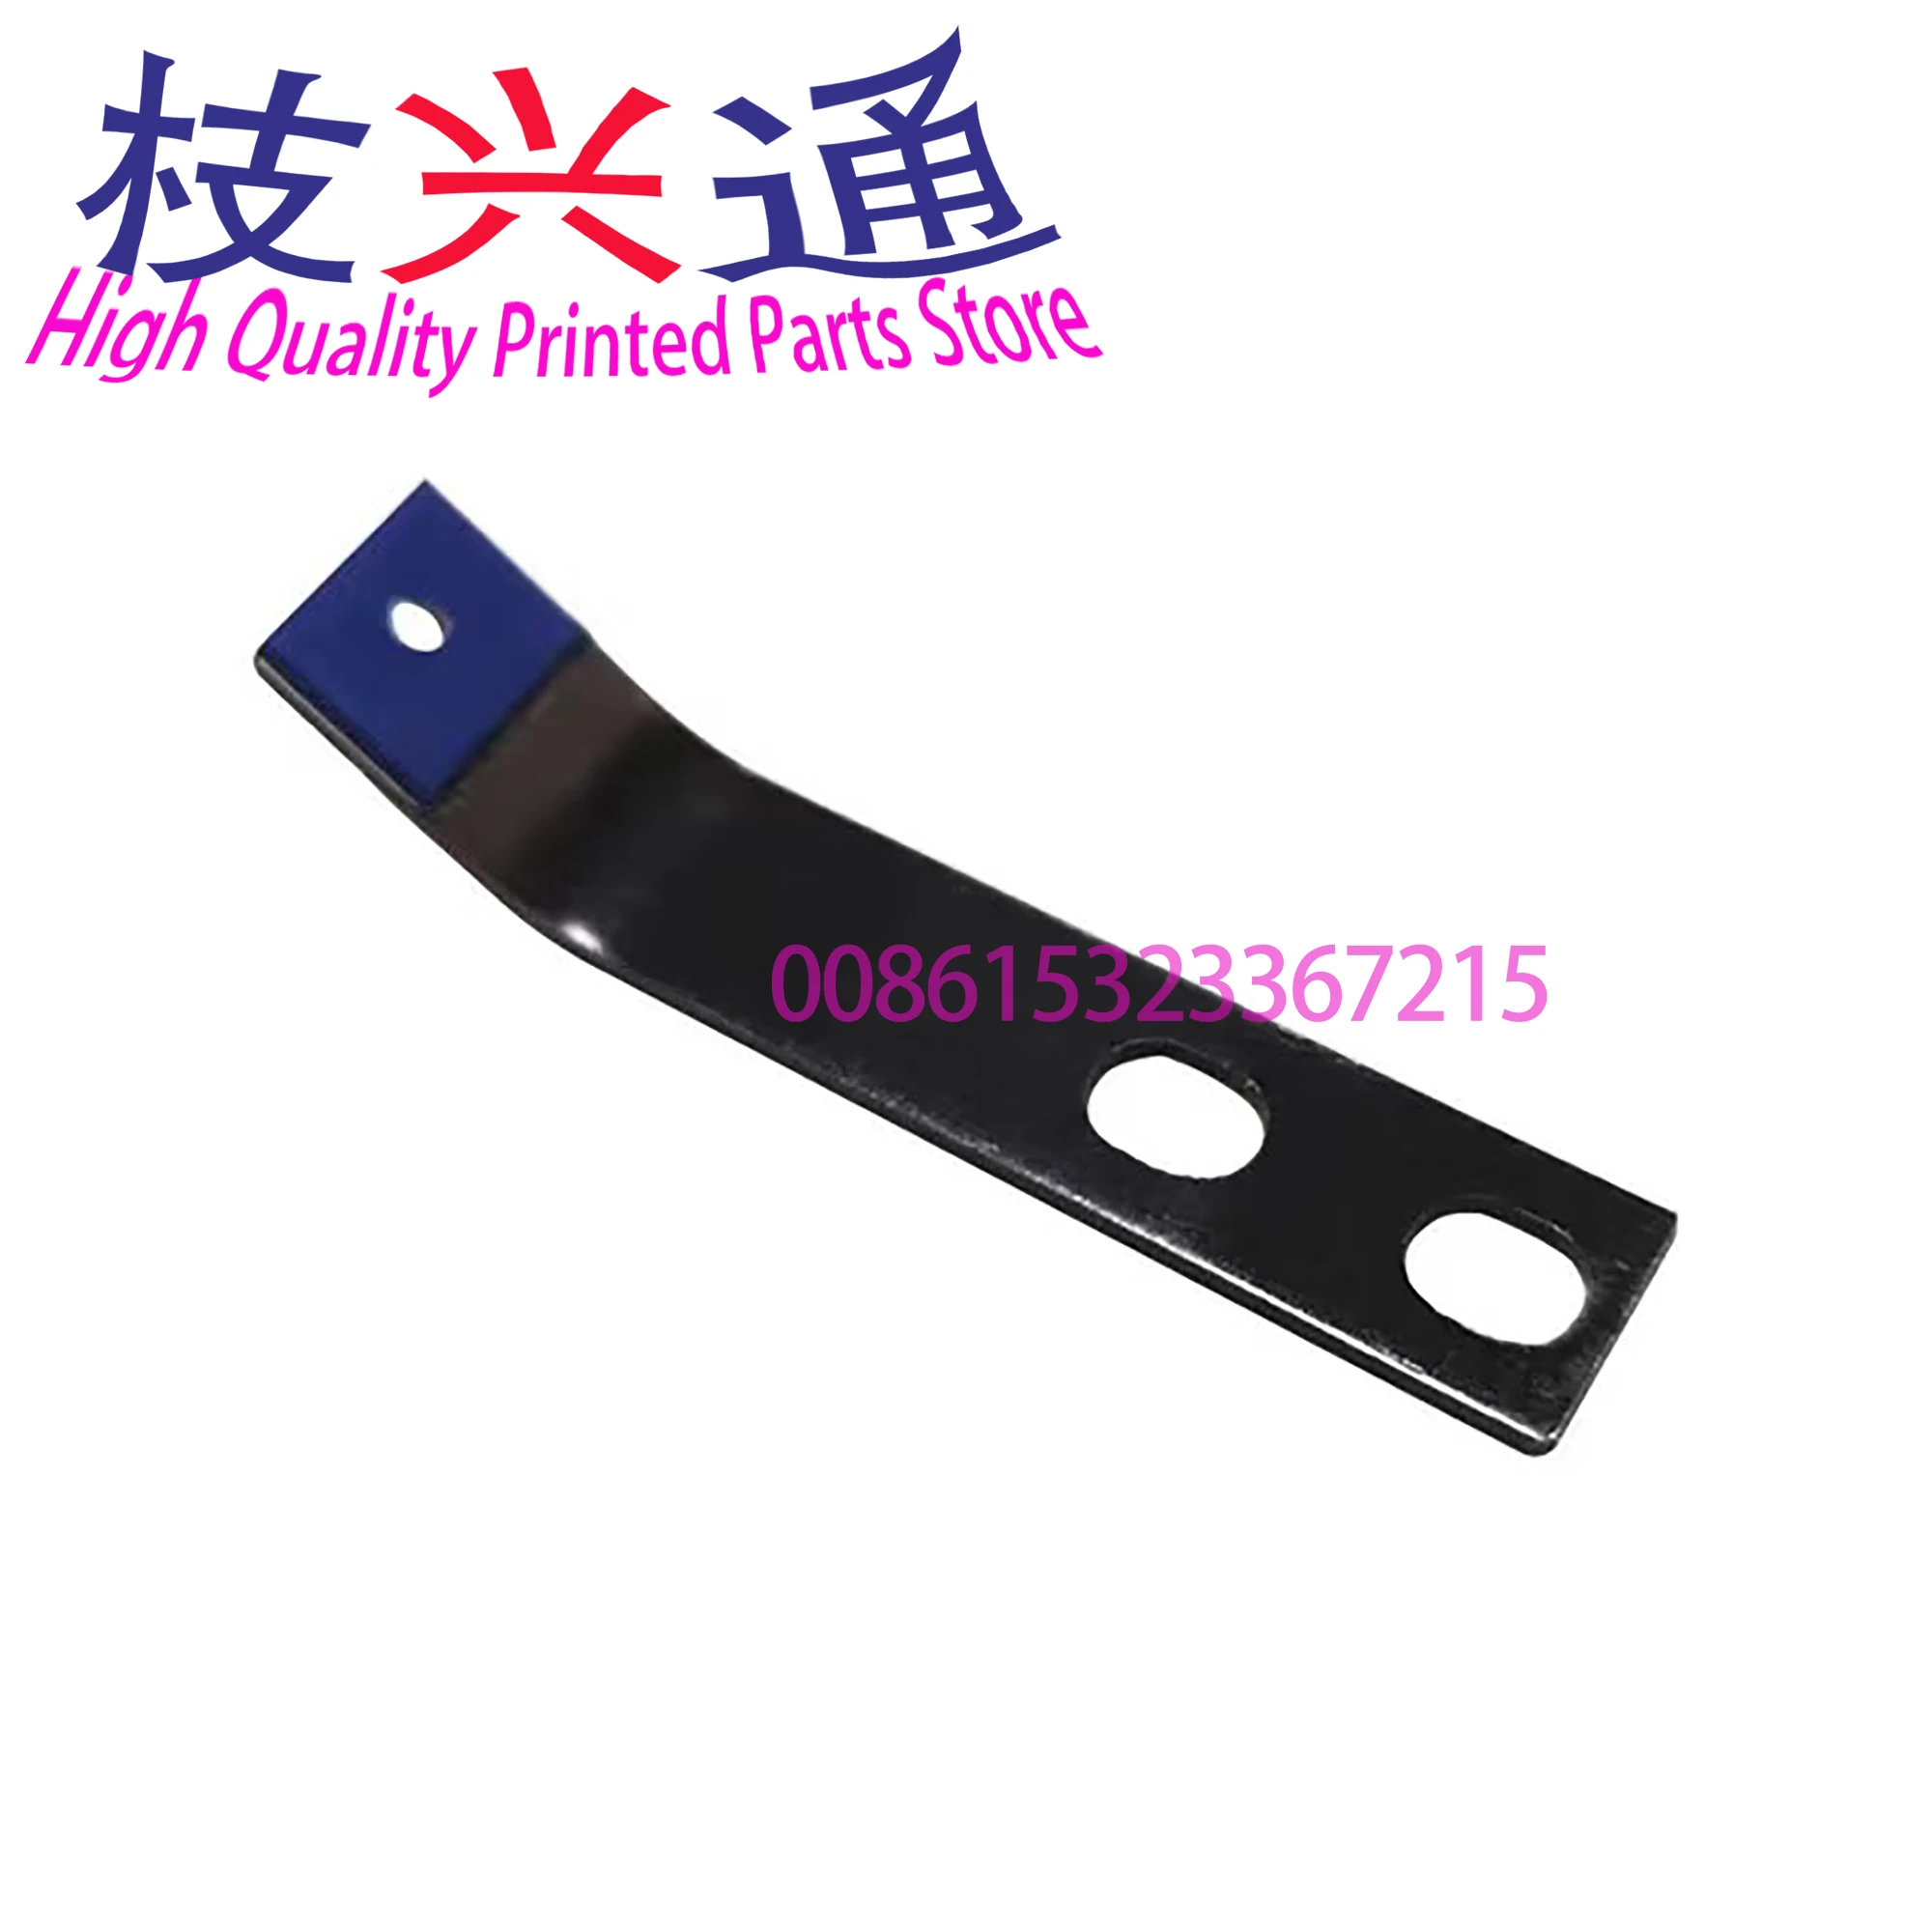 

5 Pieces Gripper on Feeder Rubber Tip 43.020.035 Gripper Finger For Heidelberg GTO52 Offset Printing Machine Spare Parts